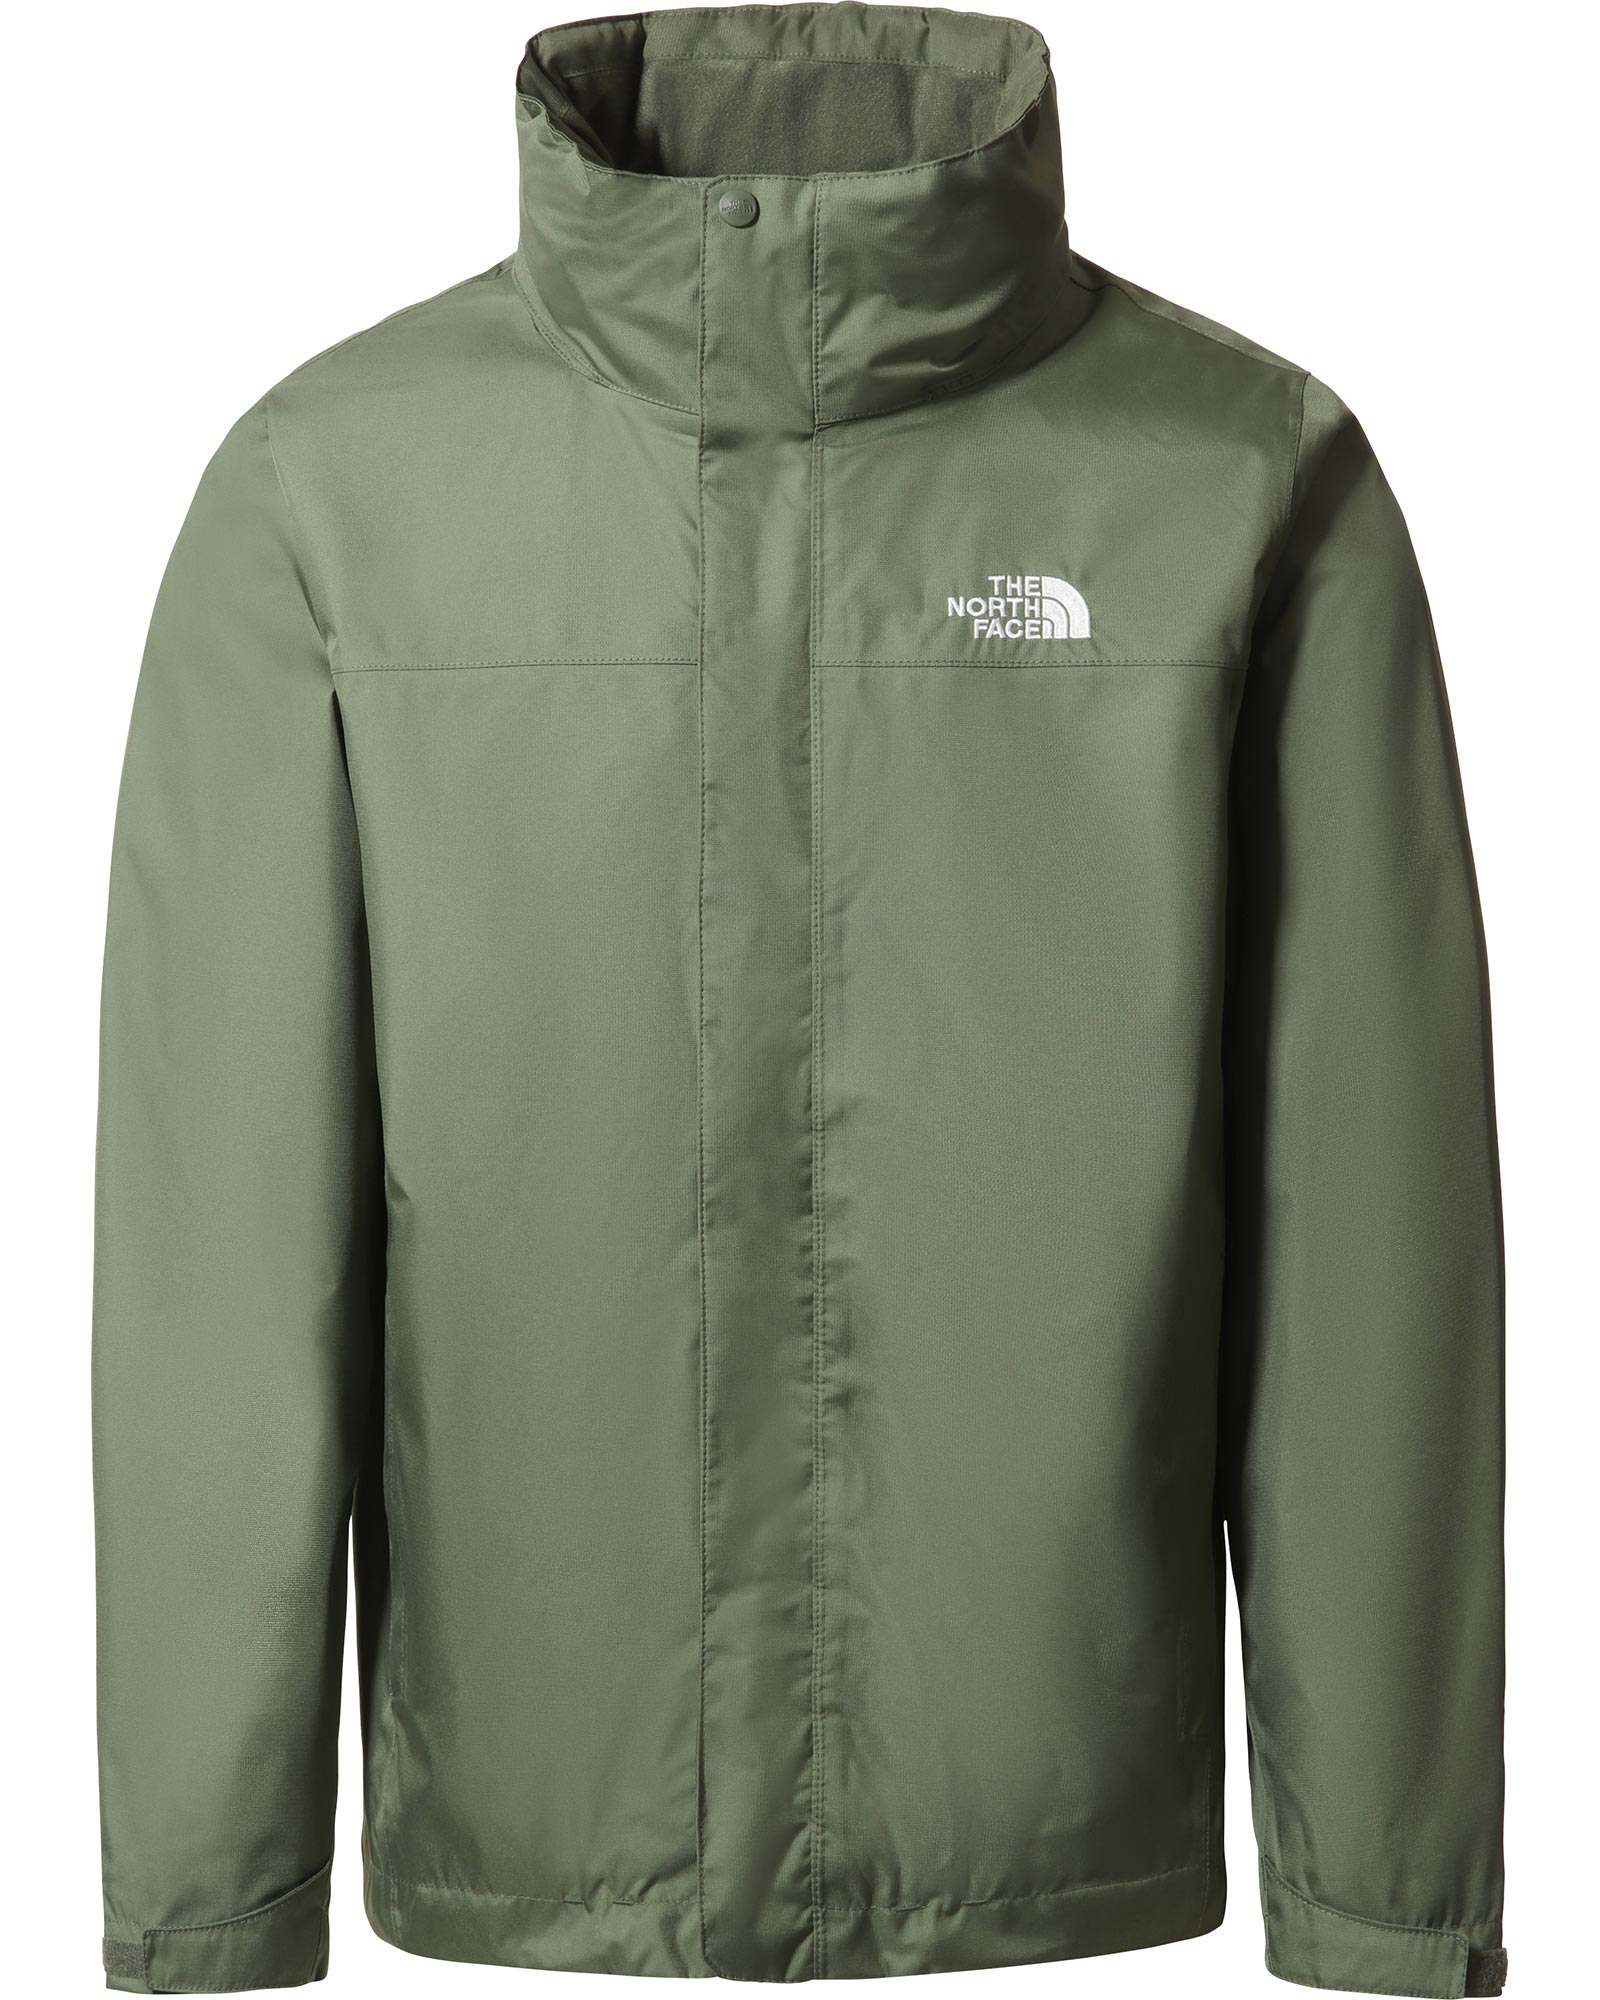 The North Face Evolve Triclimate Men’s Jacket - Thyme Green S